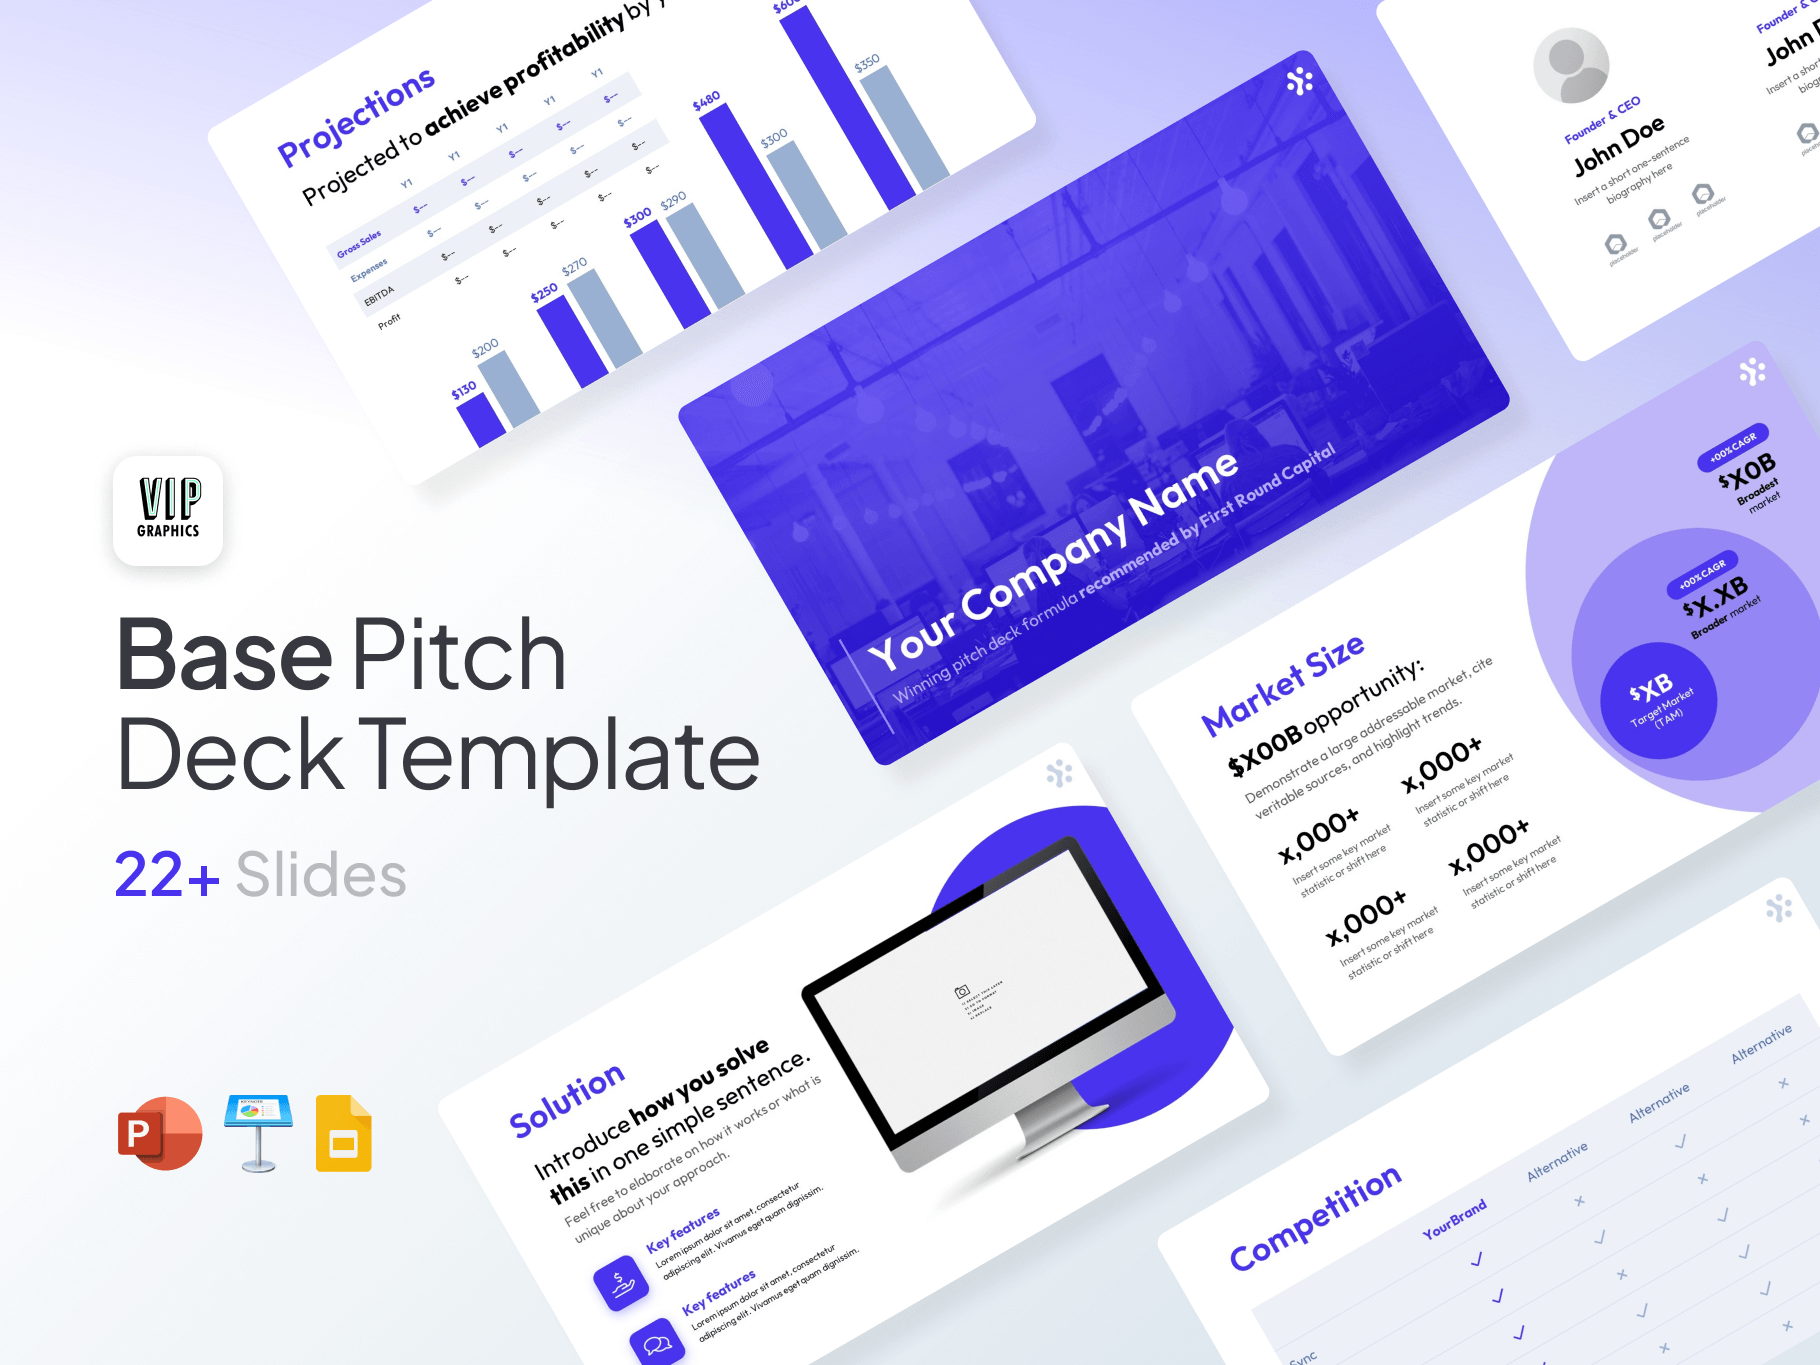 Base Pitch Deck Template